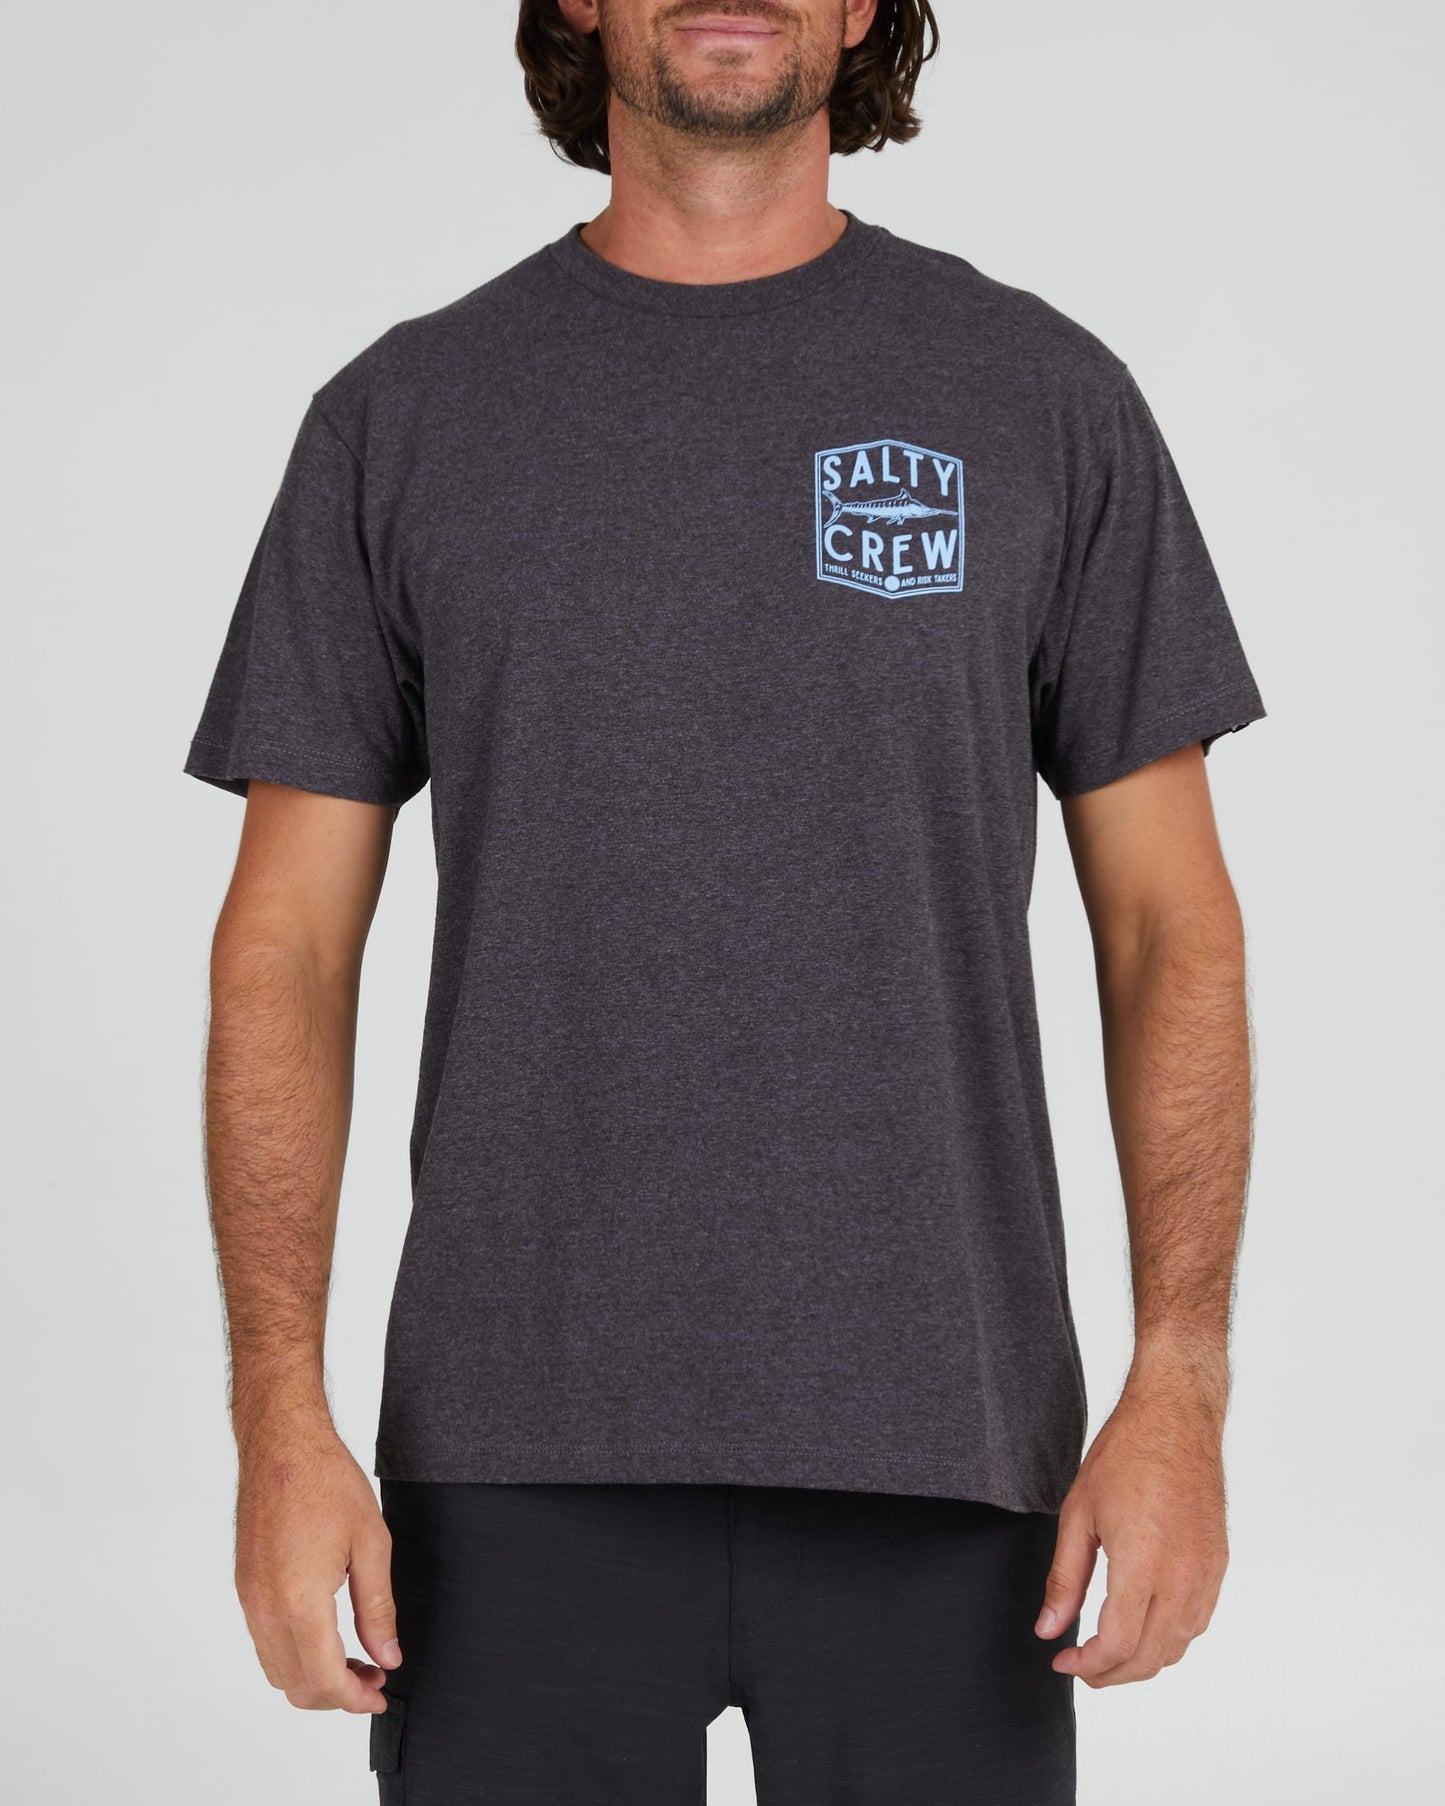 Salty crew T-SHIRTS S/S FISHERY STANDARD S/S TEE - Charcoal Heather in Charcoal Heather